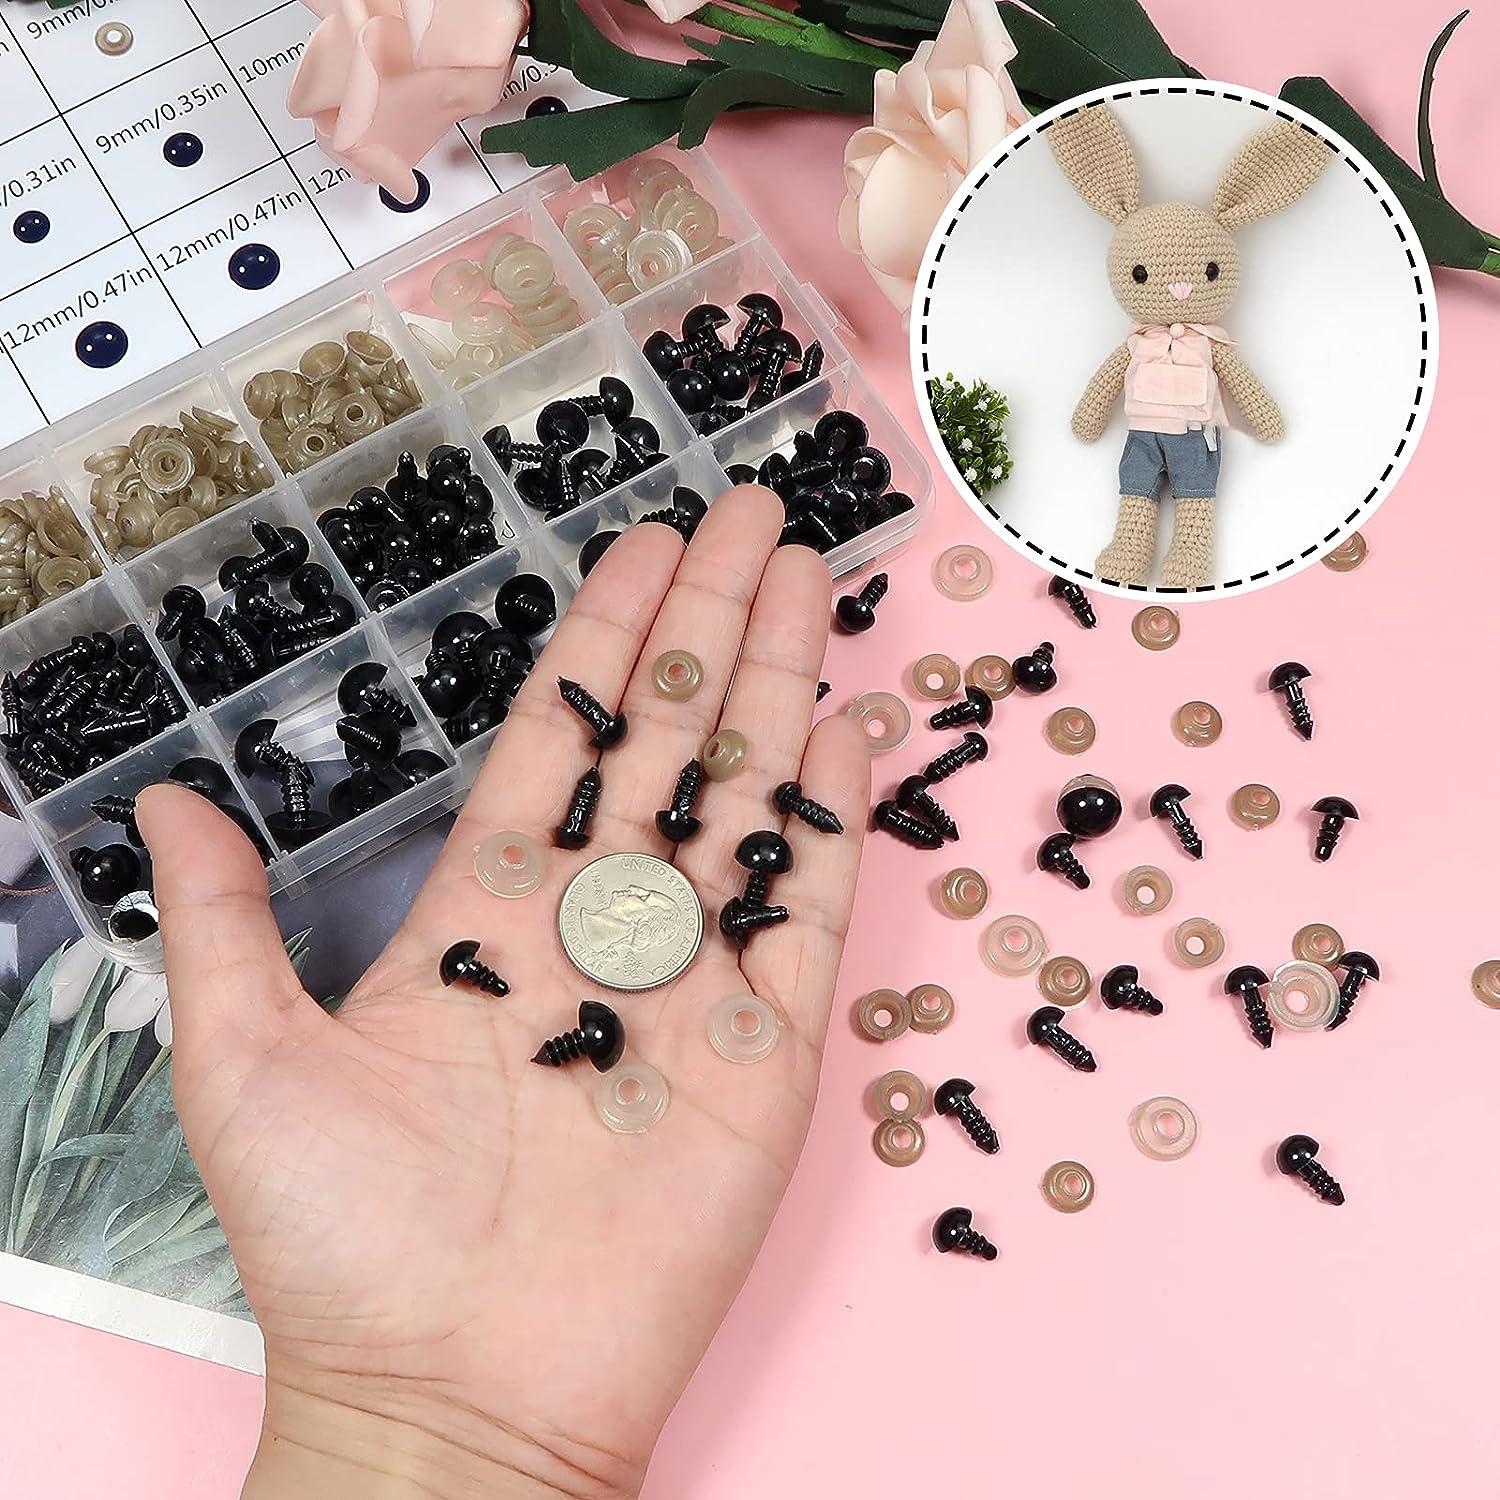 Toaob 150pcs 6mm Plastic Safety Eyes Crafts Safety Eyes with Washers for  Stuffed Animals Amigurumi Crochet Bears Doll Making - 150pcs 6mm Plastic  Safety Eyes Crafts Safety Eyes with Washers for Stuffed